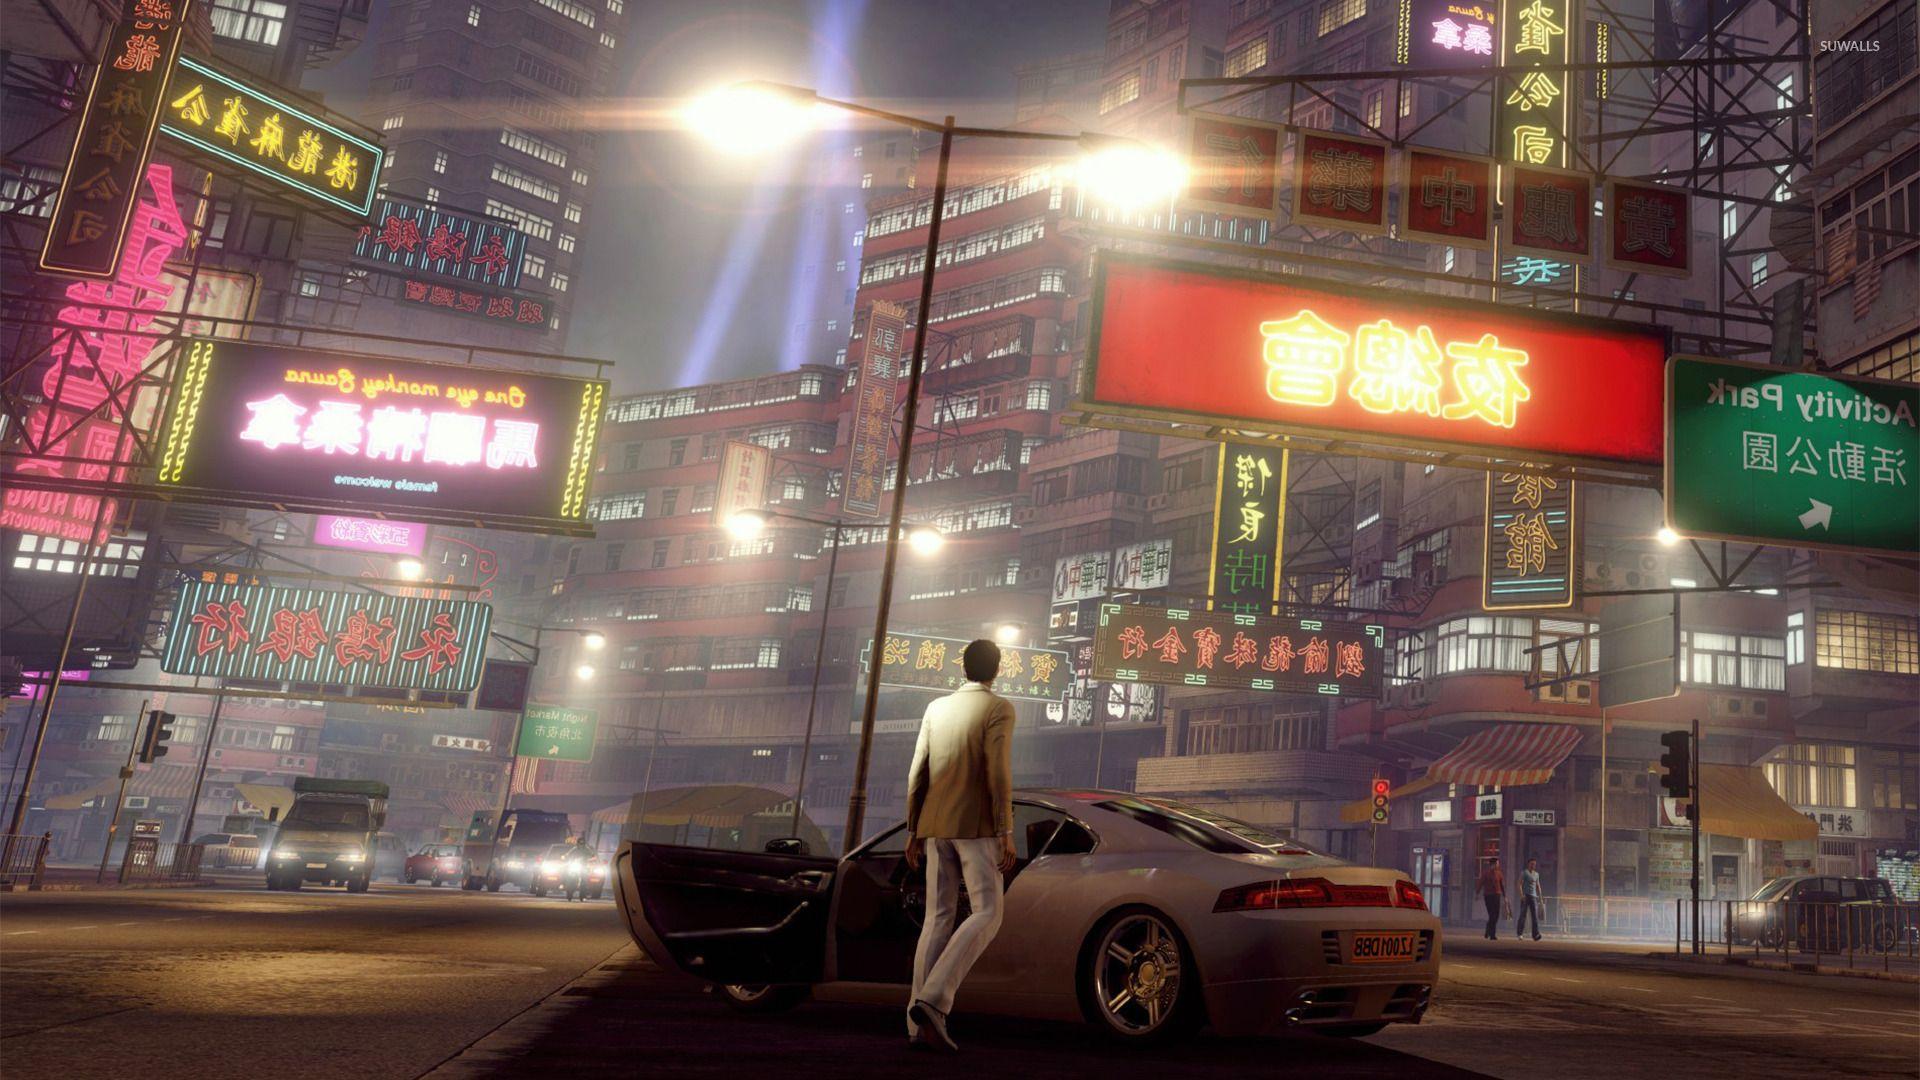 4k sleeping dogs images